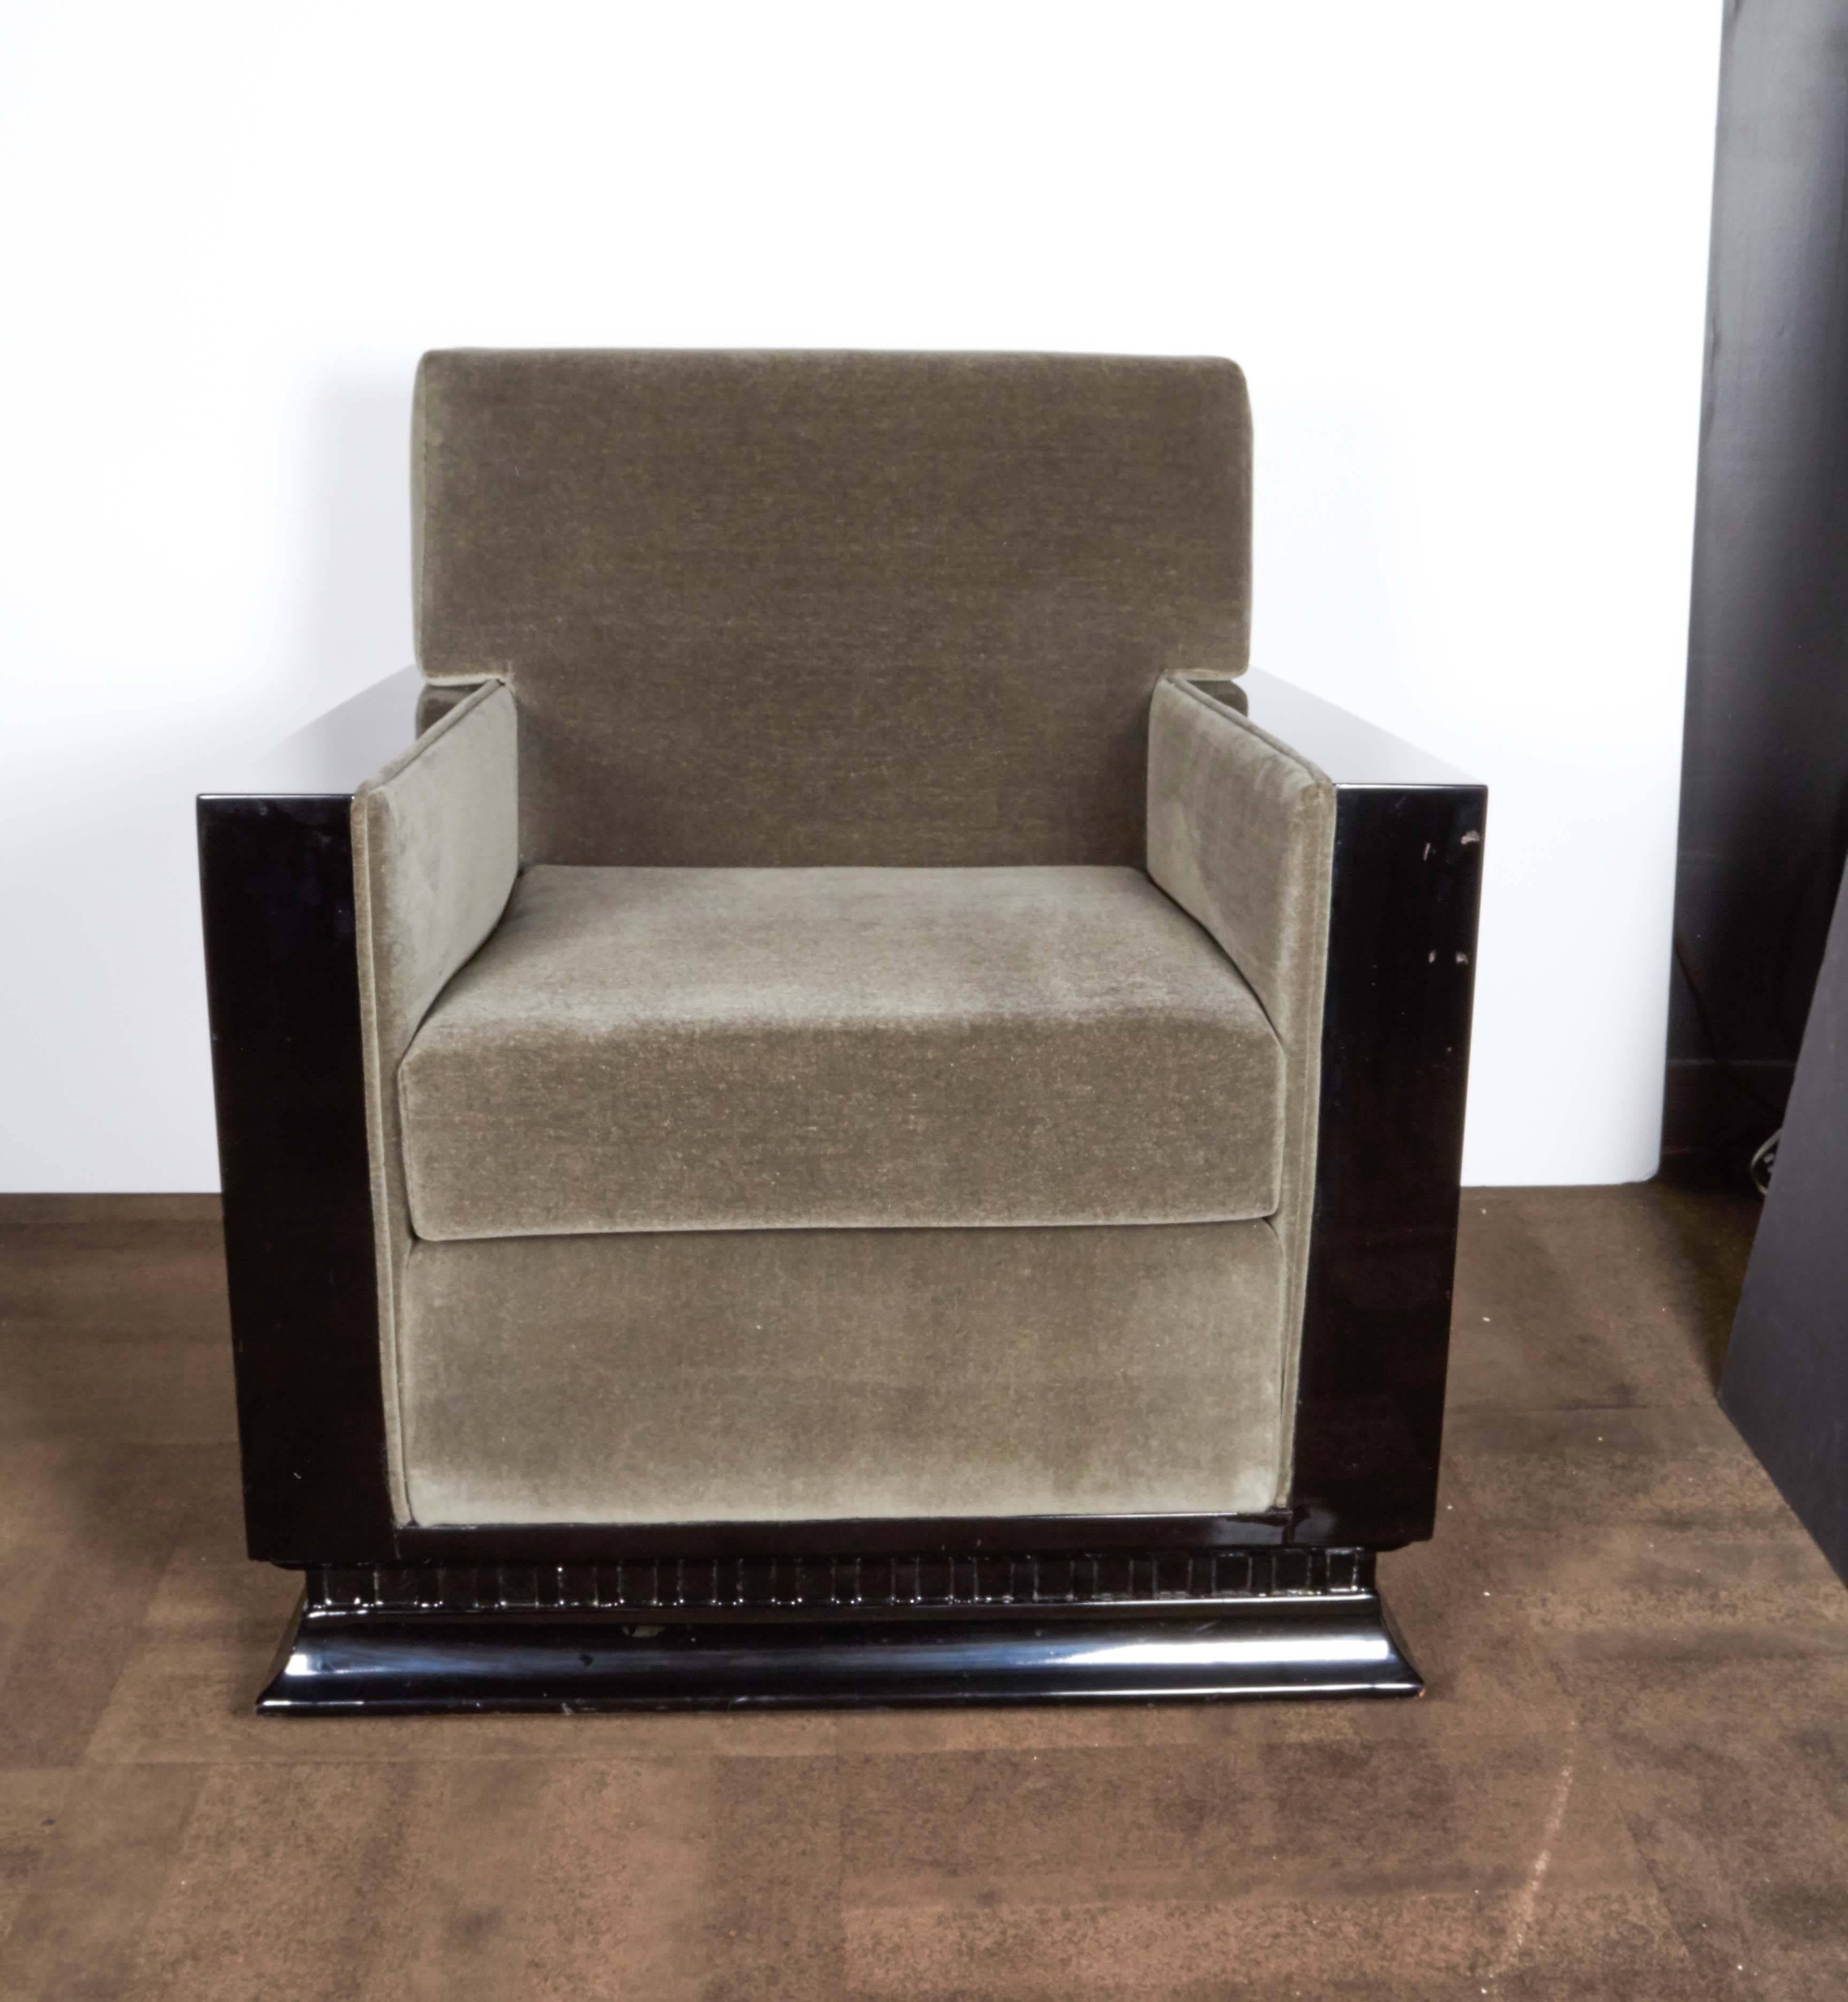 Pair of stunning Art Deco chairs with outstanding streamline design. Upholstered in luxe grey mohair with striking black lacquered frames. The profiles have beautiful bookmatched exotic wood inlays of Carpathian elm. The bases have a plinth design